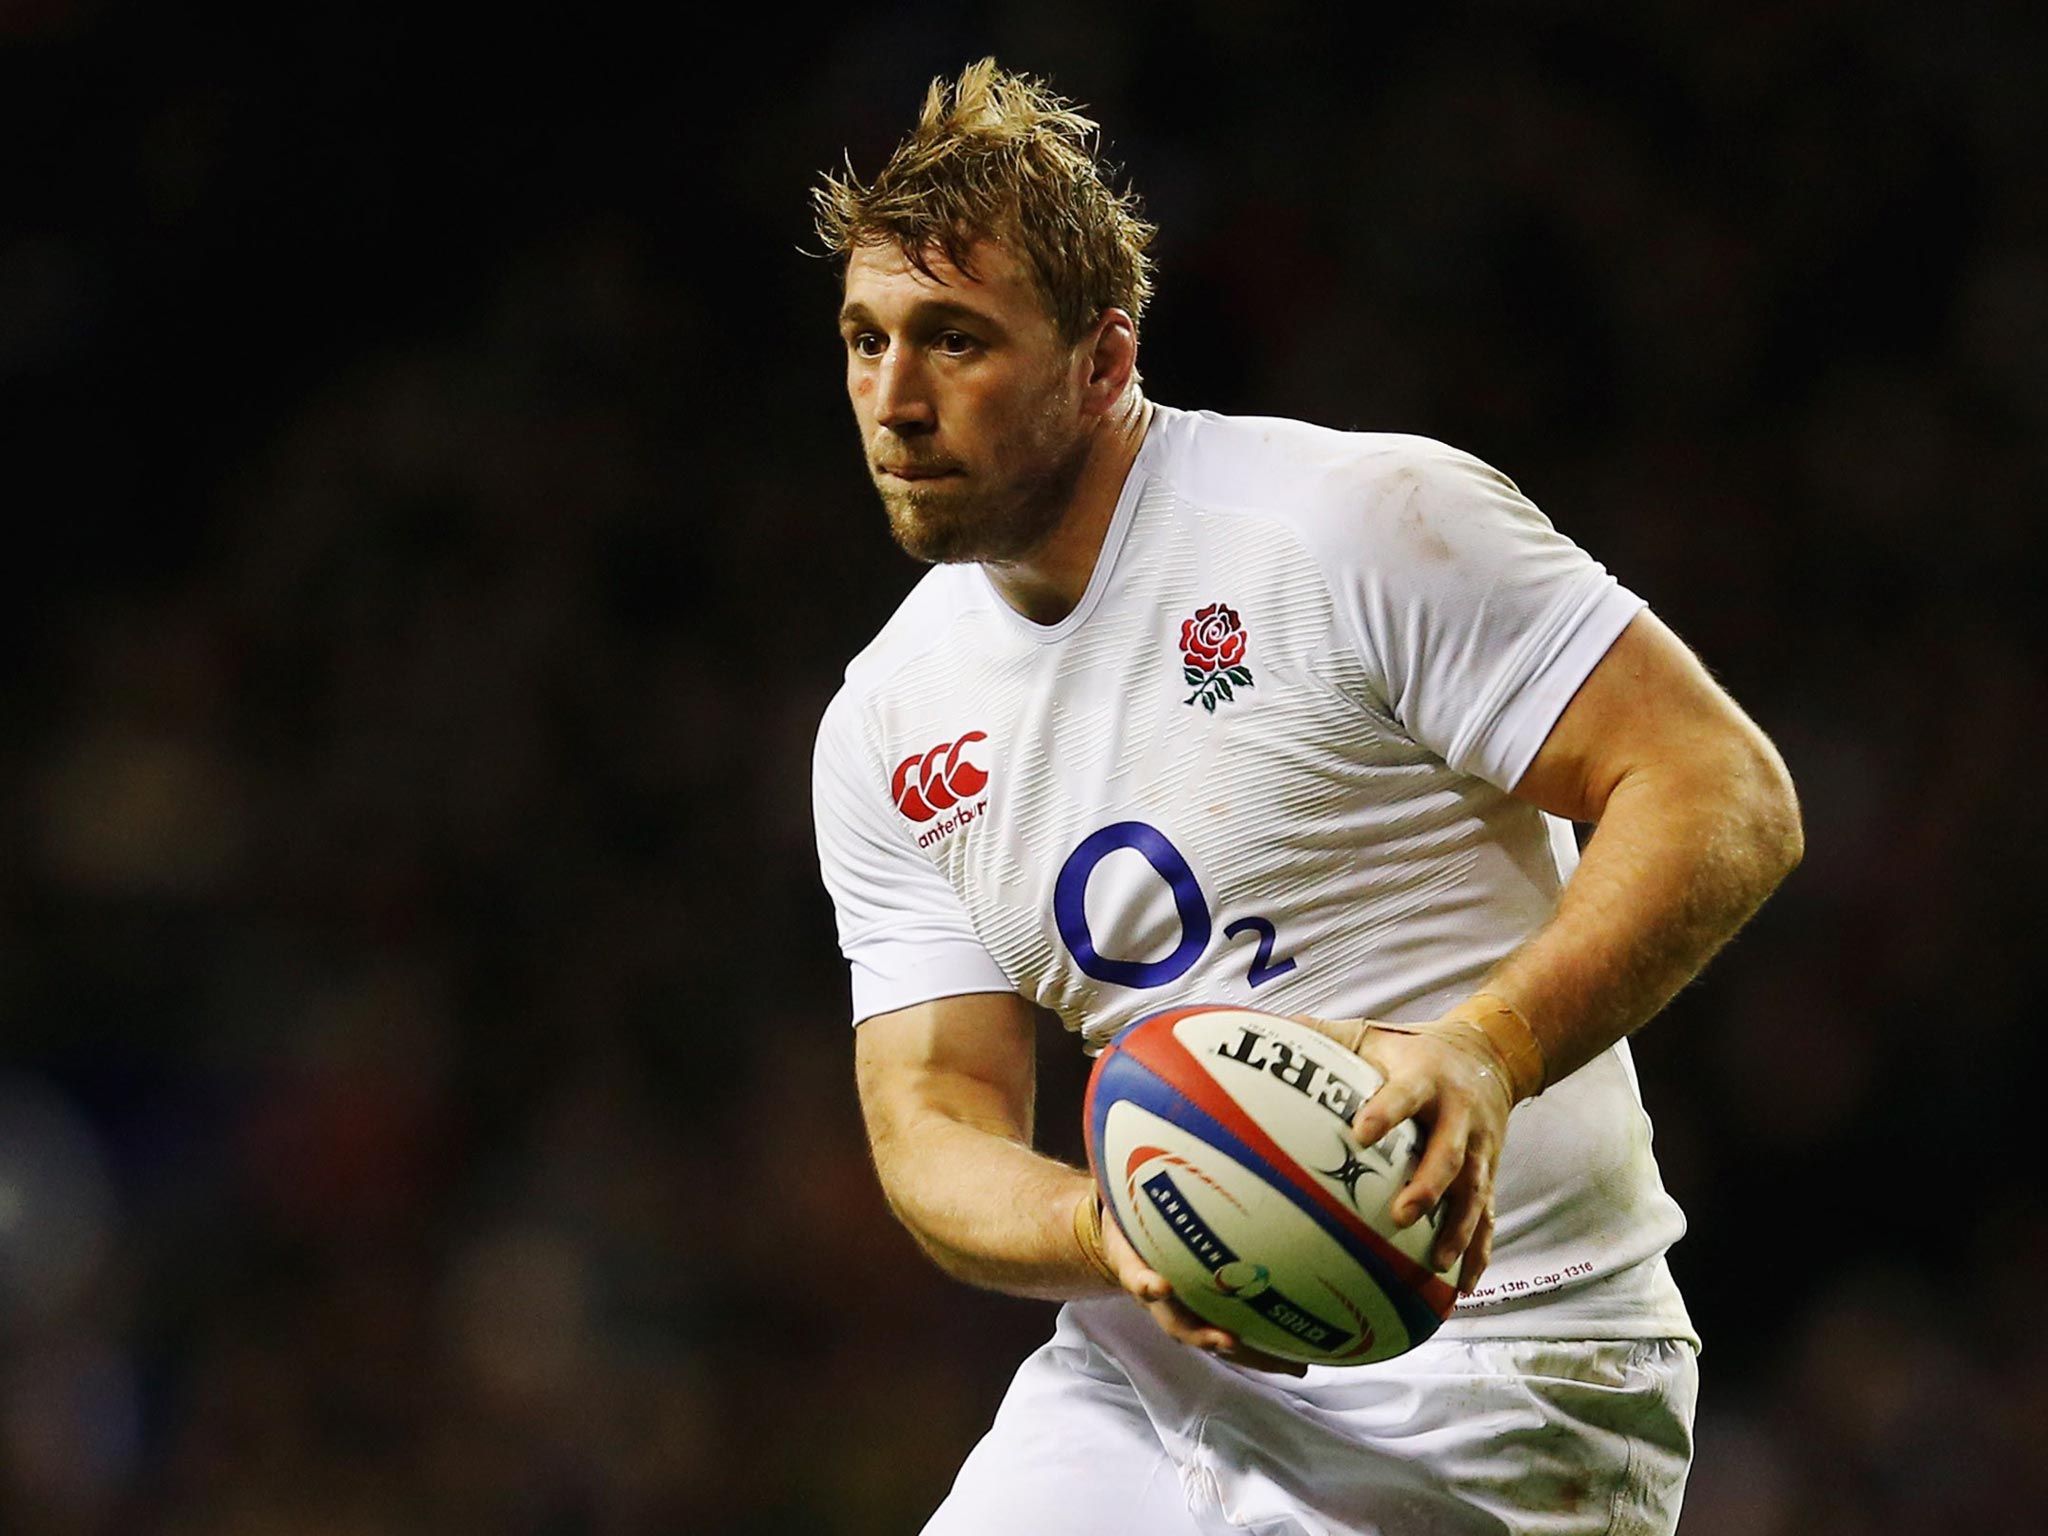 Chris Robshaw’s development in the Six Nations impressed Neil Back, a former England flanker